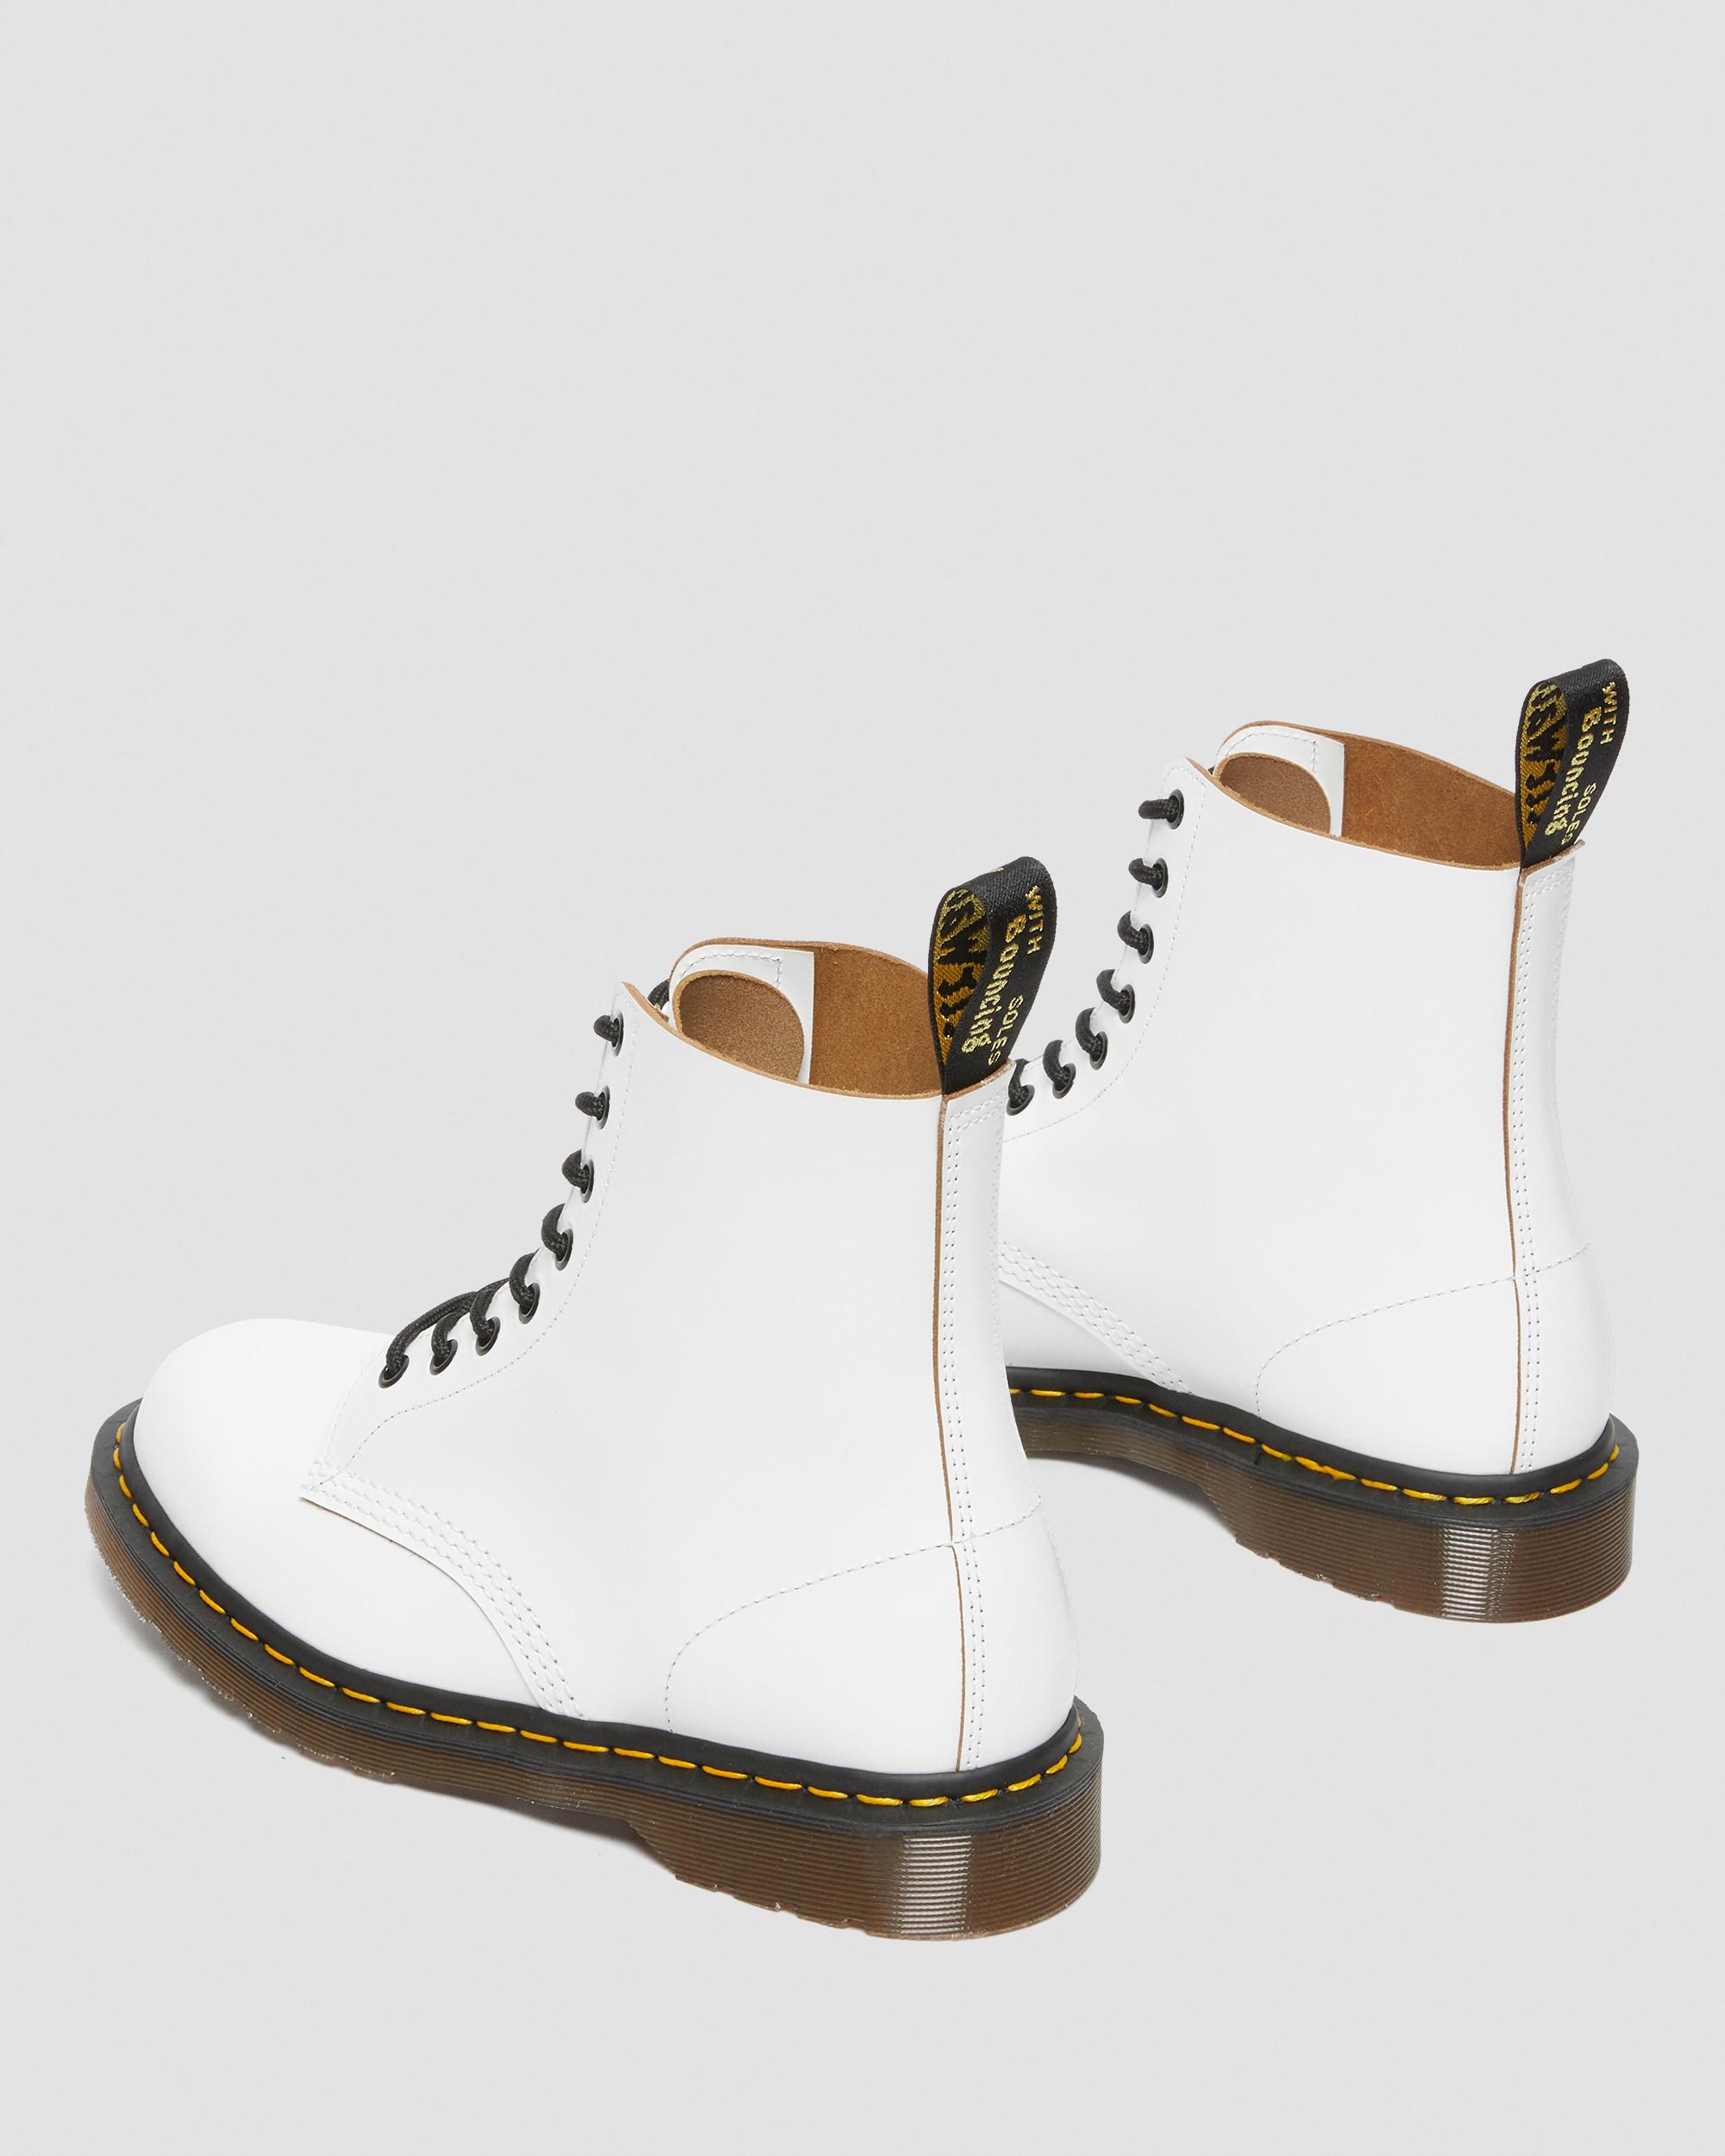 DR MARTENS 1460 Vintage Made in England Lace Up Boots